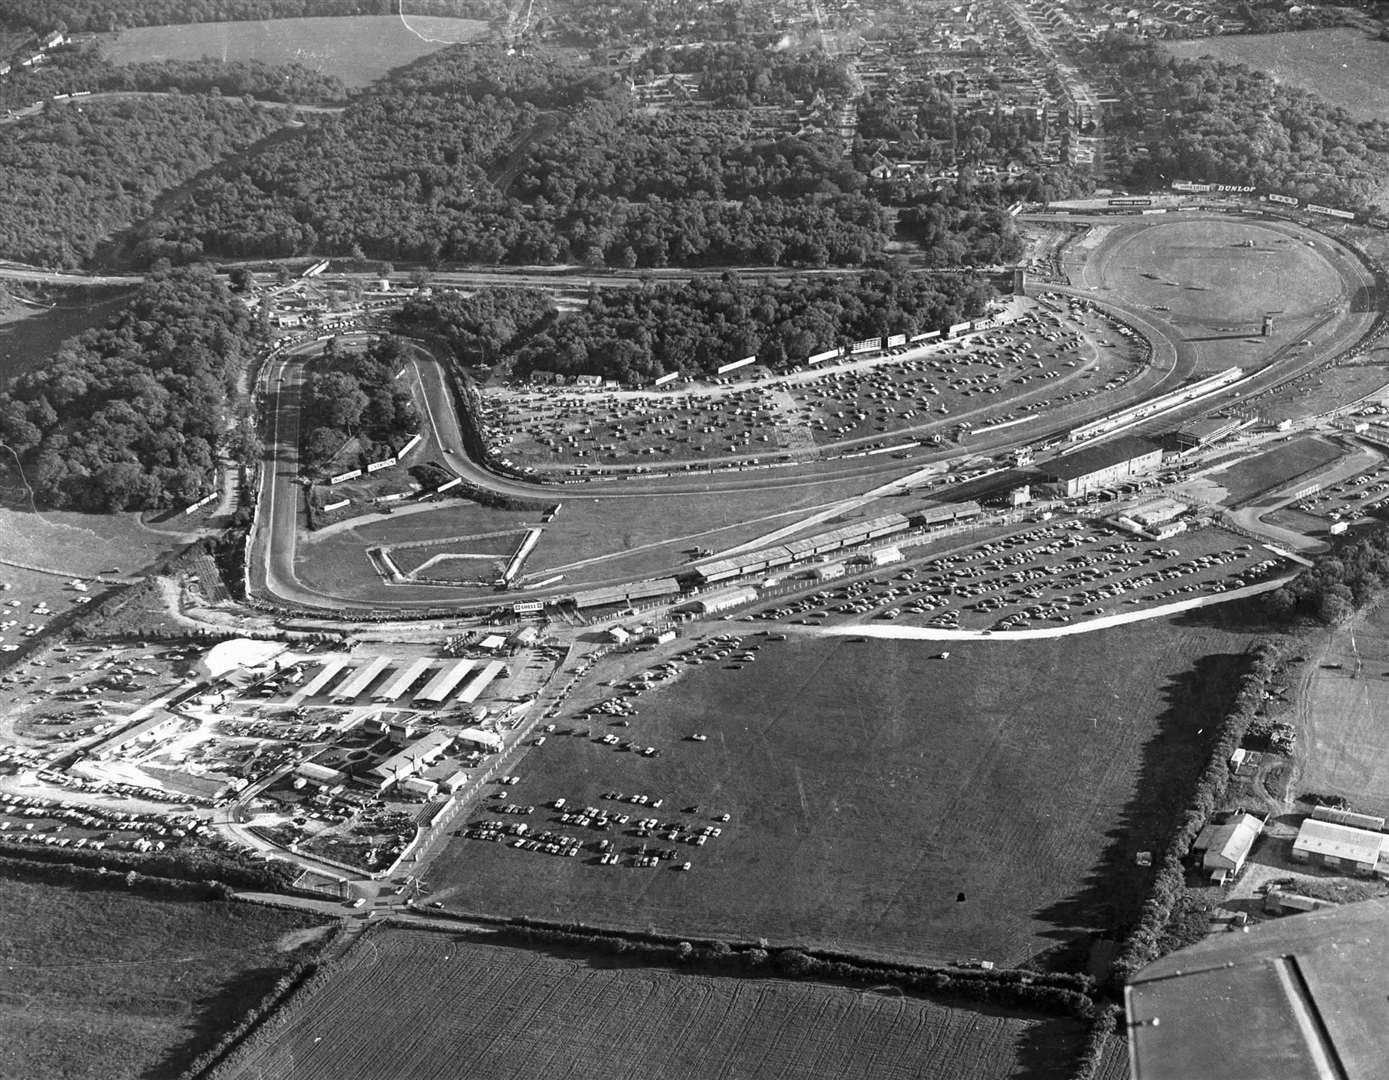 A bird's eye view from 1970 of Brands Hatch, which had held its first Grand Prix six years earlier